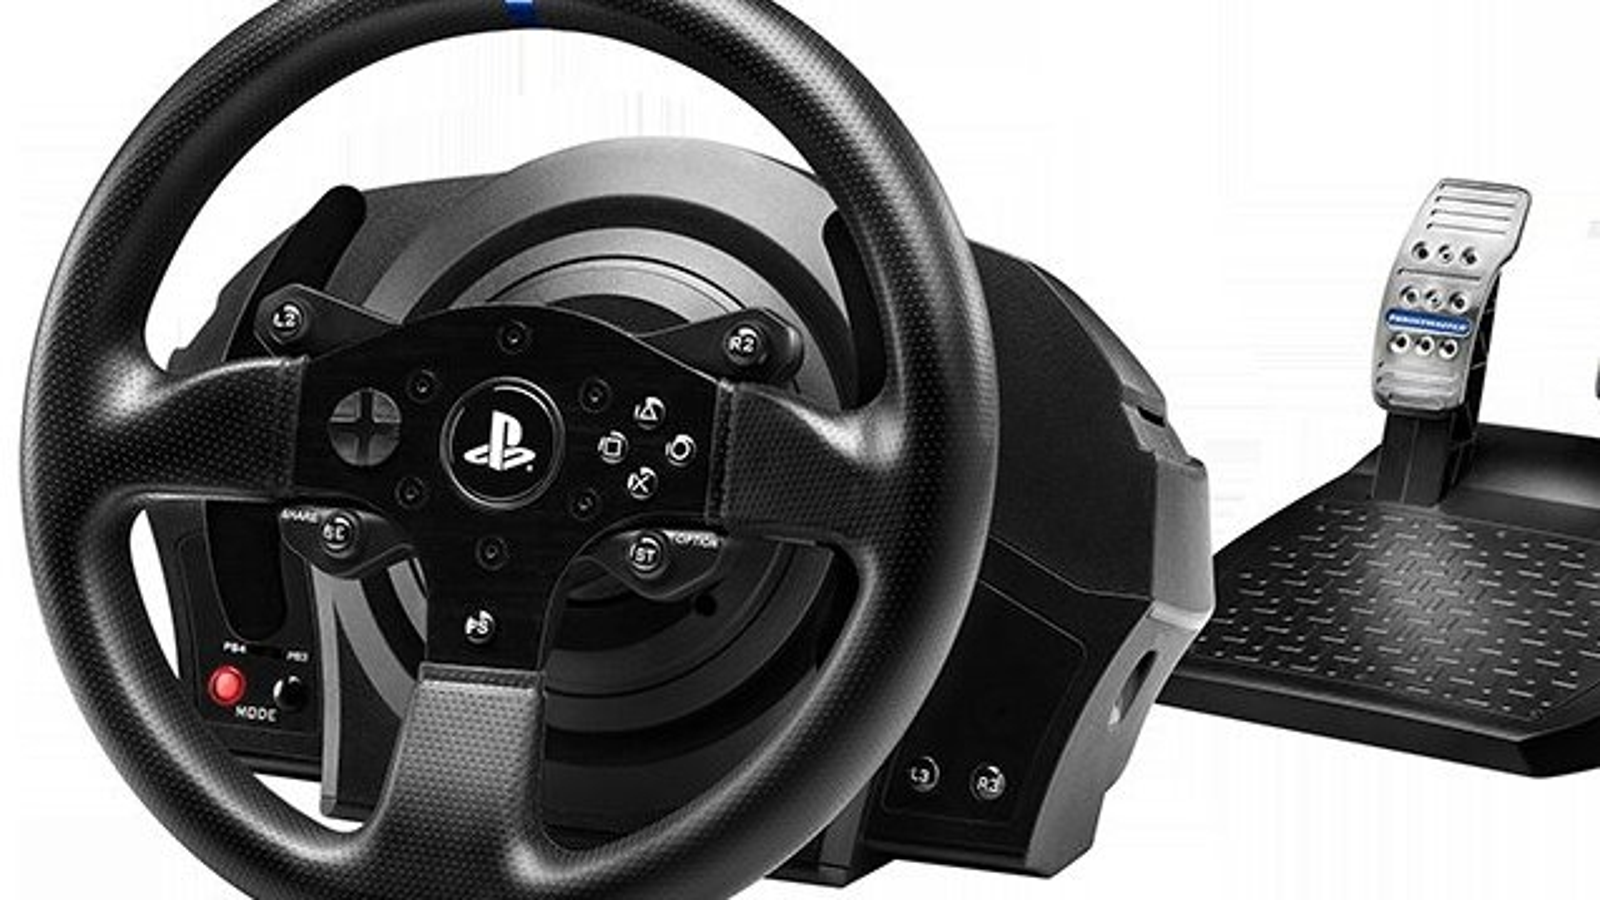 pause Reaktor varm What's the deal with steering wheels for PS4 and Xbox One? | Eurogamer.net